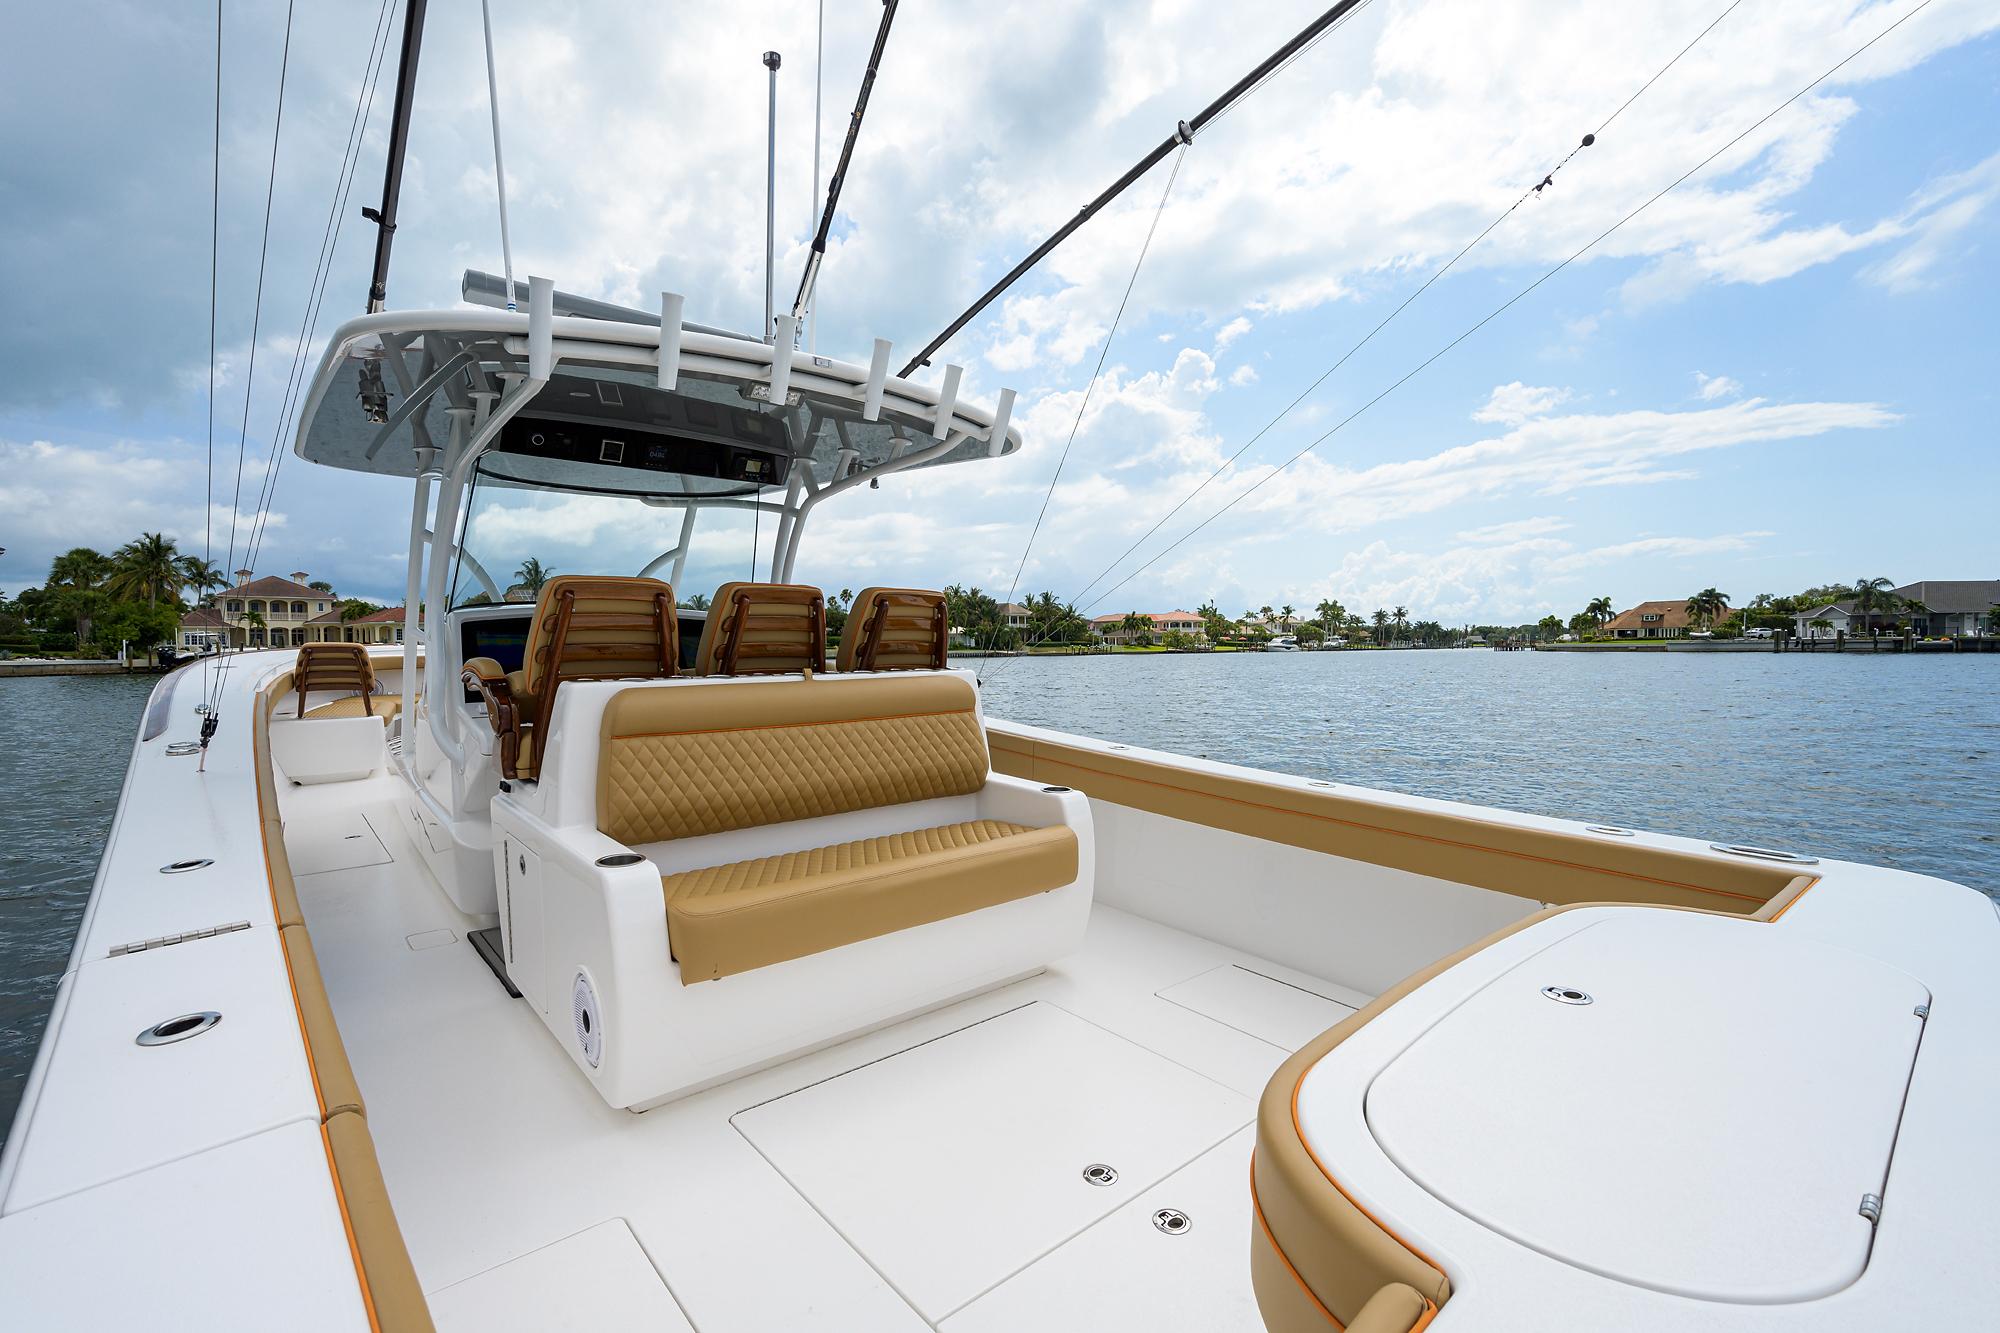 Valhalla 41 Reel Time - Aft Facing Console Seat